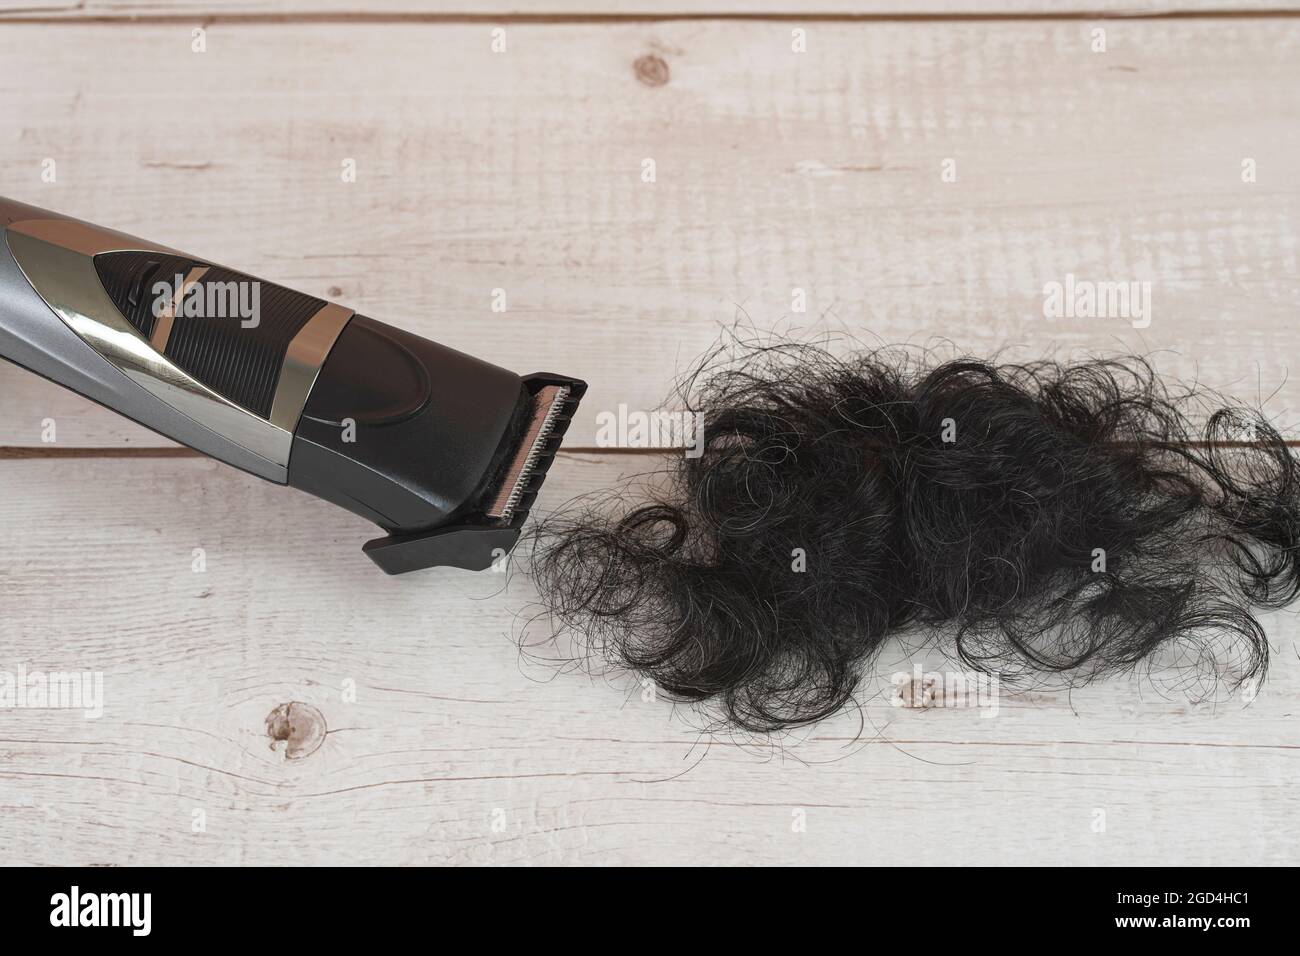 Cordless hair trimmer. During the pandemic when barbershops are closed, more men bought the devise to cut their own hair. Selective focus points. Blur Stock Photo